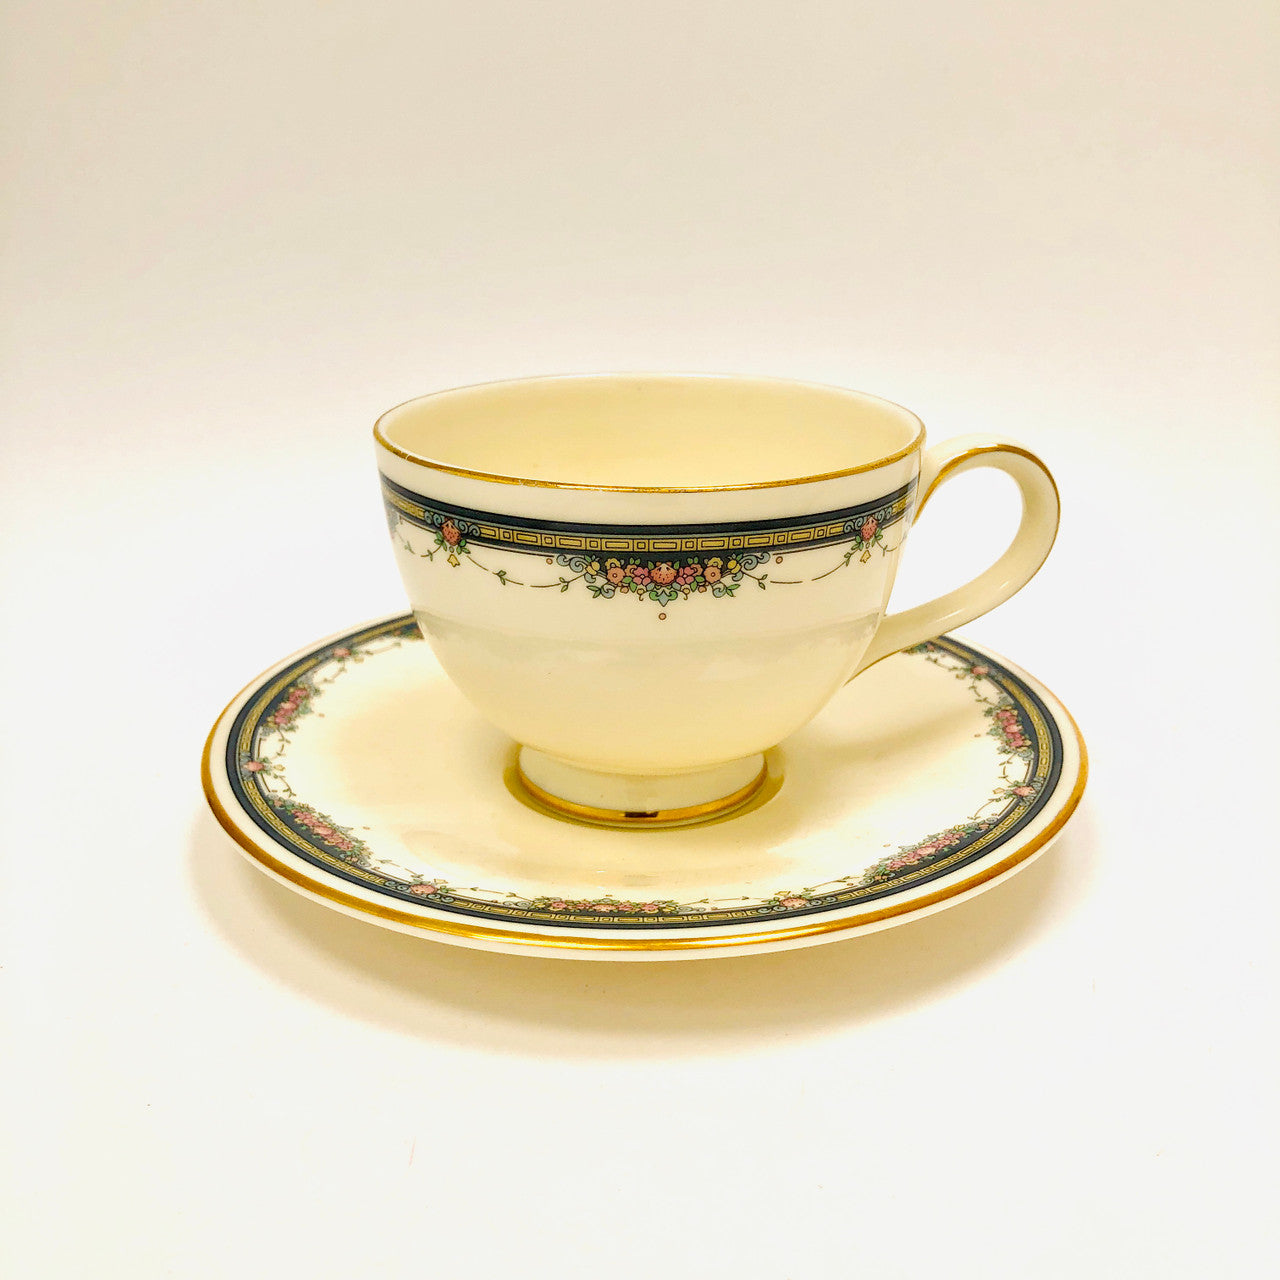 Royal Doulton, Albany, Fine Bone China, Cup, Saucer, Cup and Saucer, Vintage, England